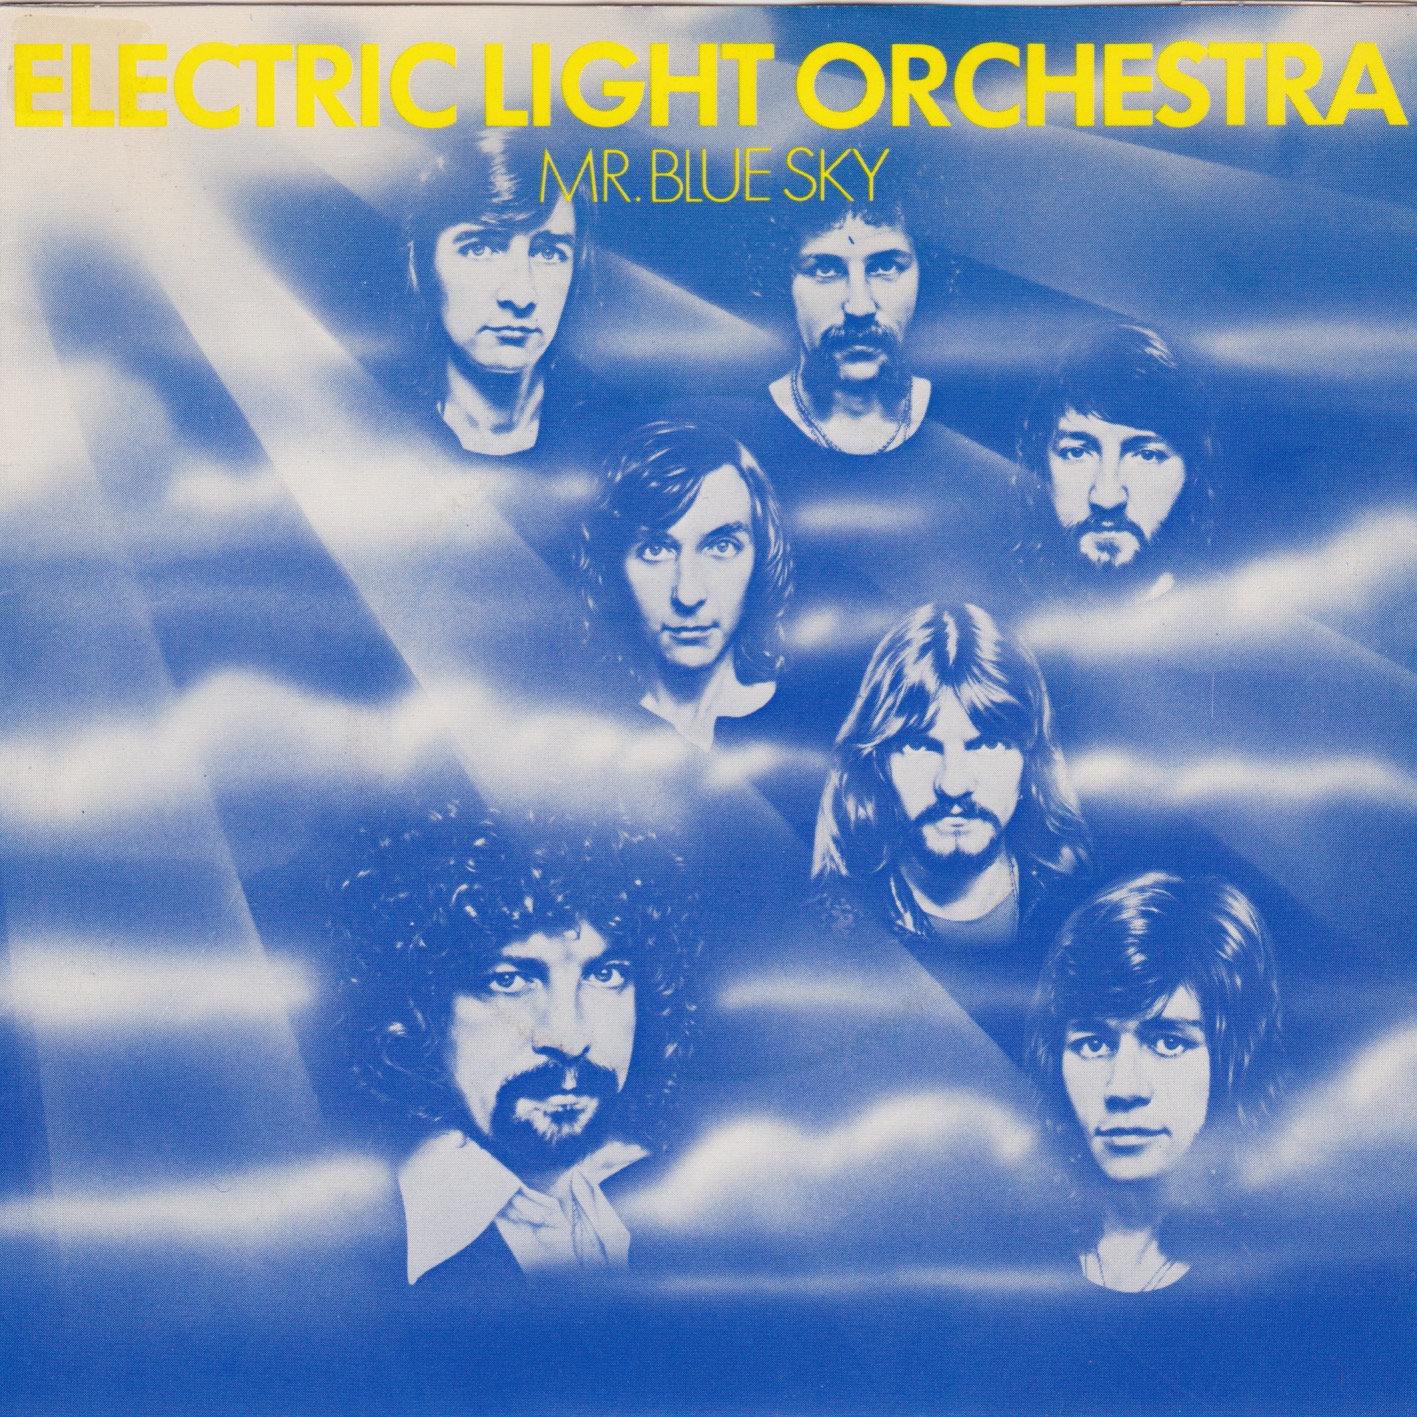 Blue skies electric light orchestra. Electric Light Orchestra 1977. Mr. Blue Sky Electric Light Orchestra. Группа Electric Light Orchestra фотоальбомов. Electric Light Orchestra out of the Blue 1977.